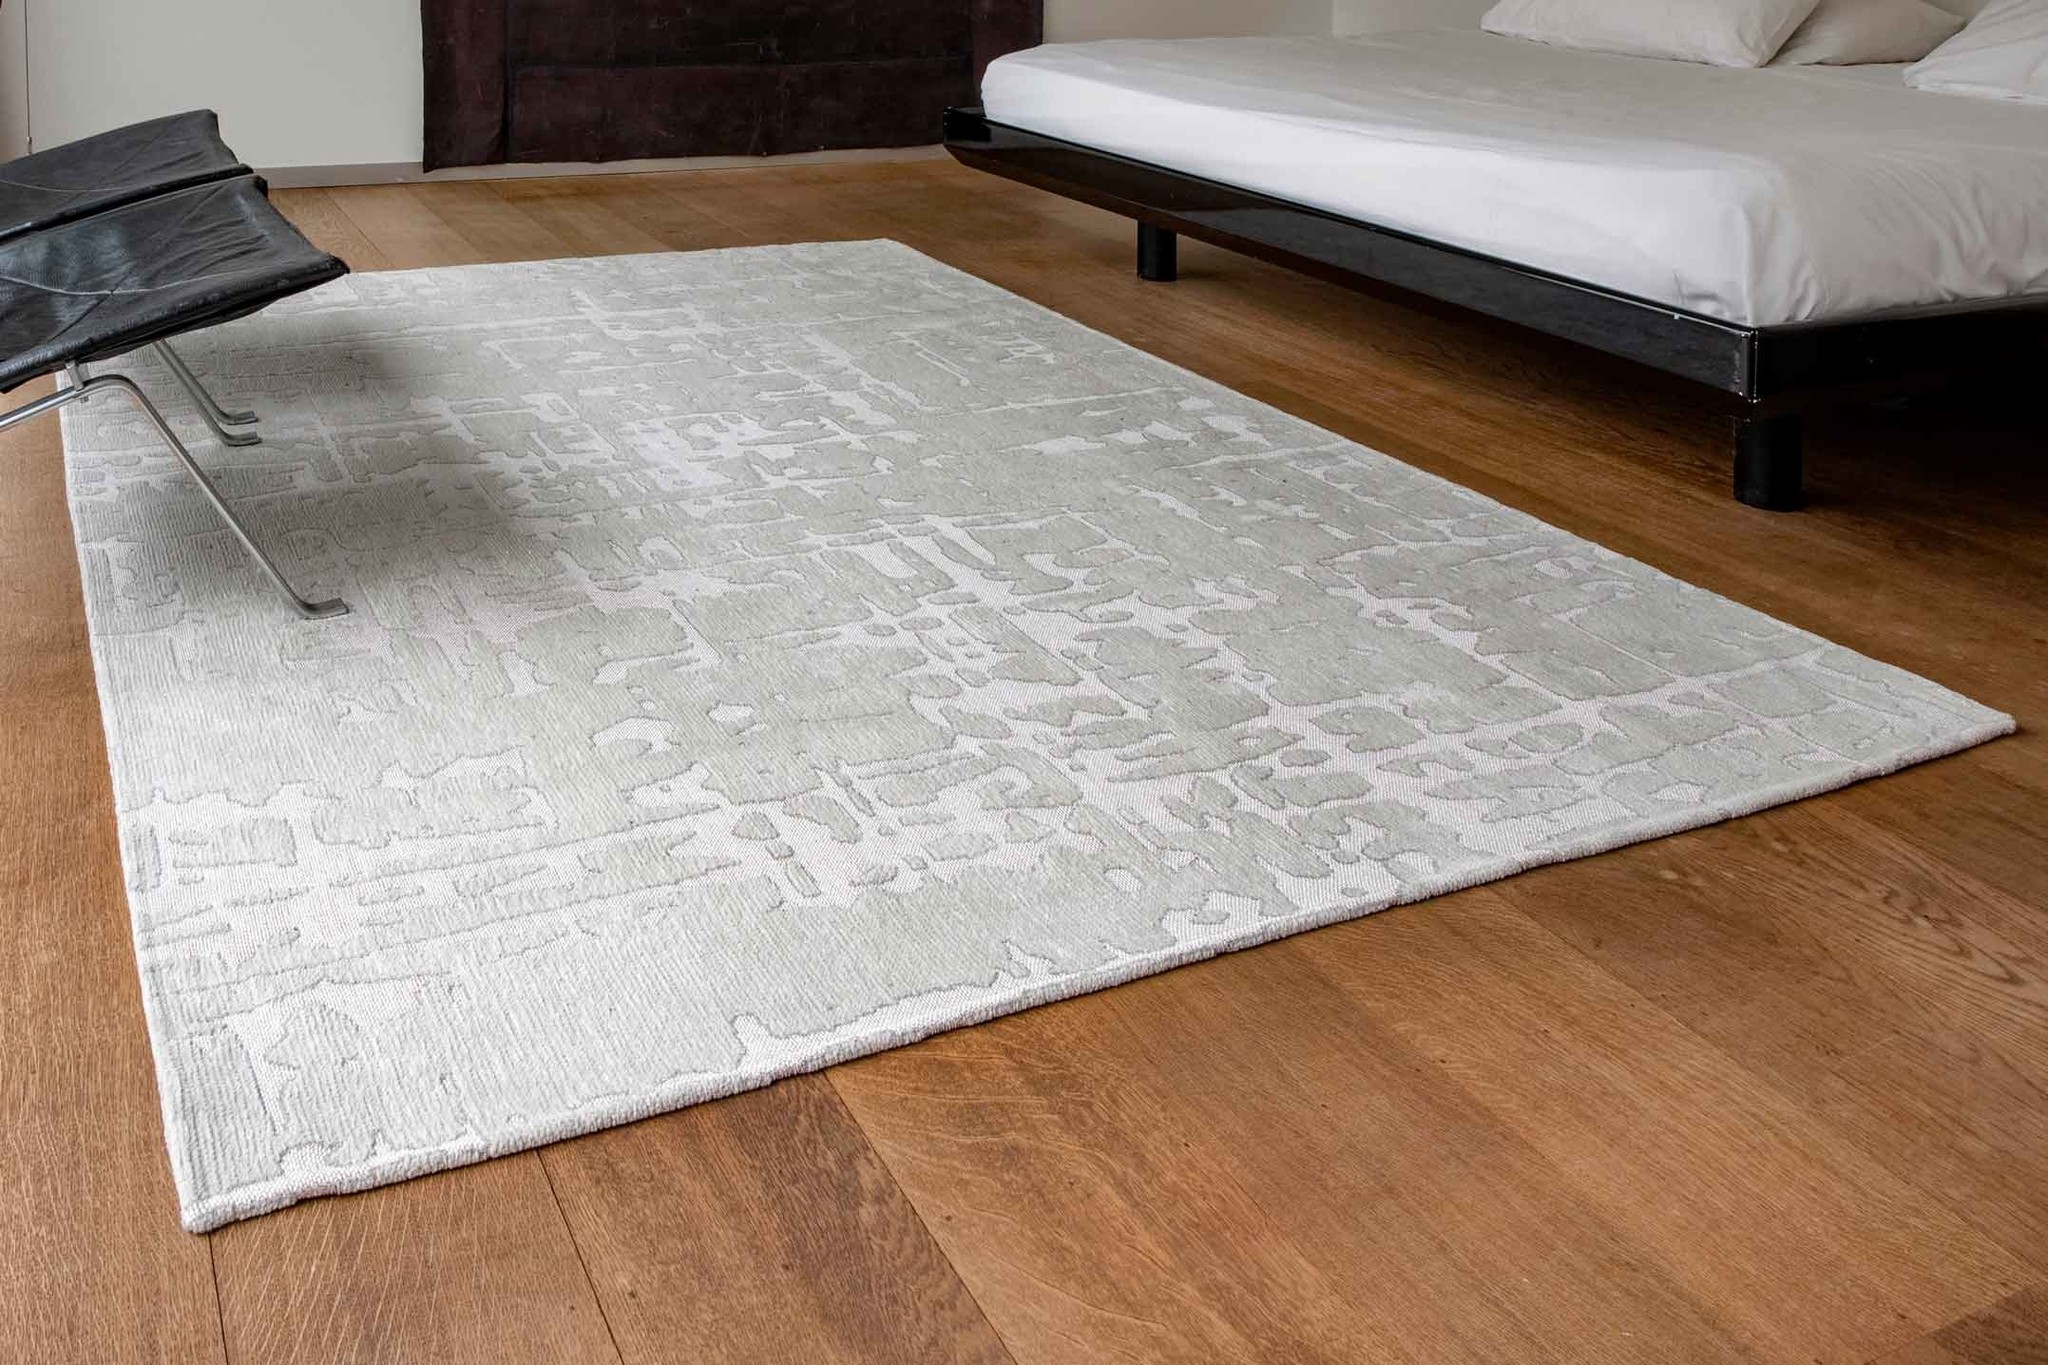 Abstract Silver Belgian Rug ☞ Size: 8' x 11' 2" (240 x 340 cm)